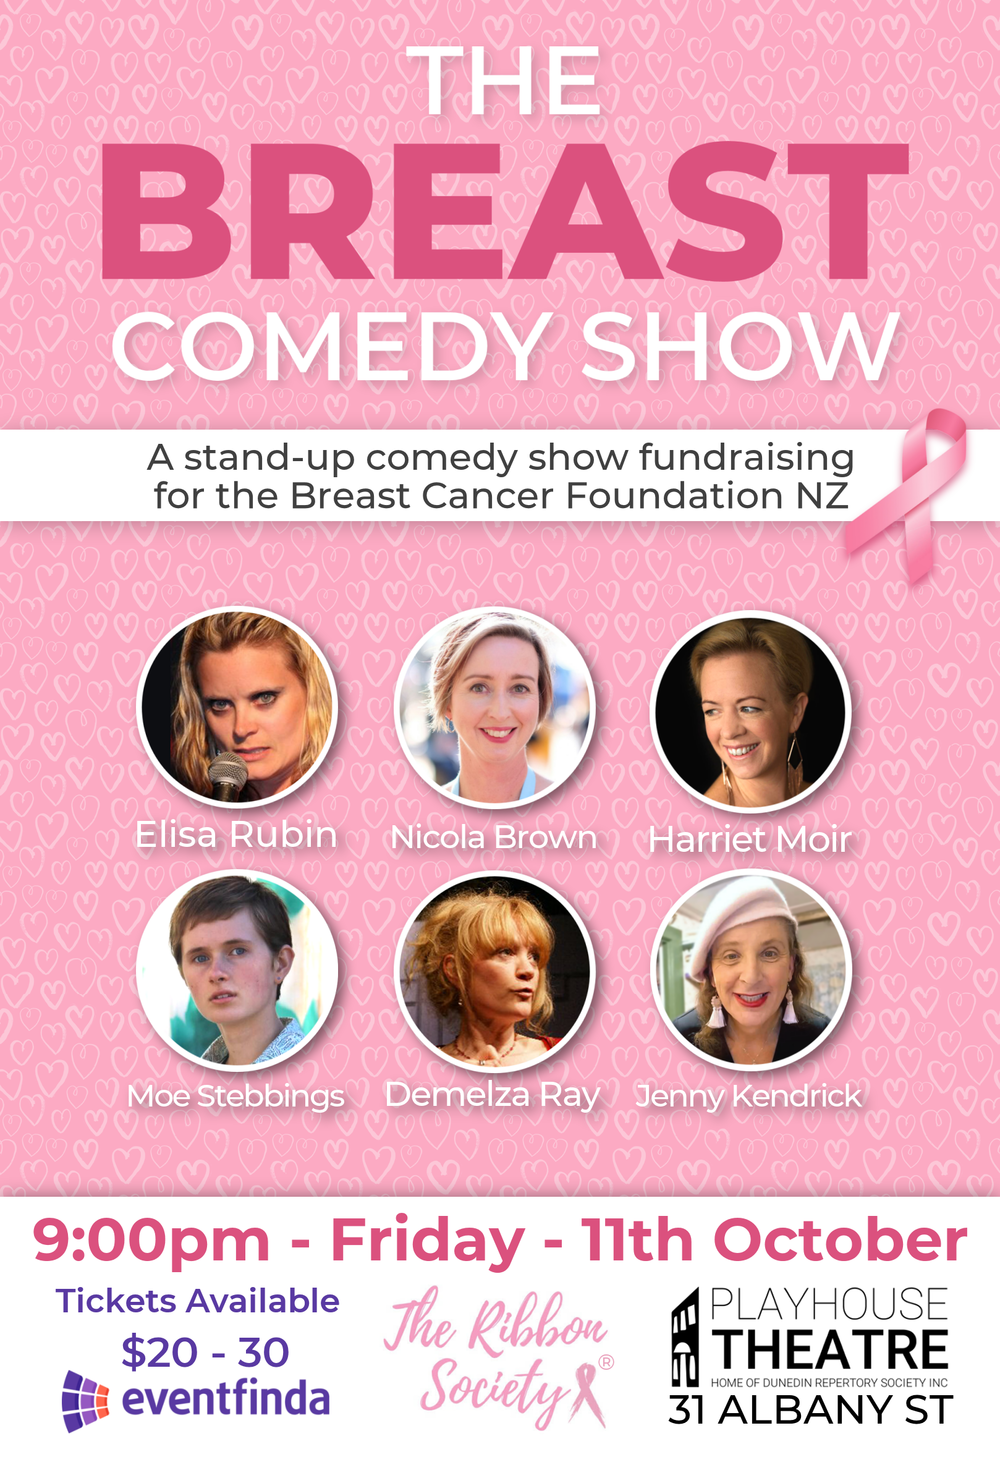 The Breast Comedy Show